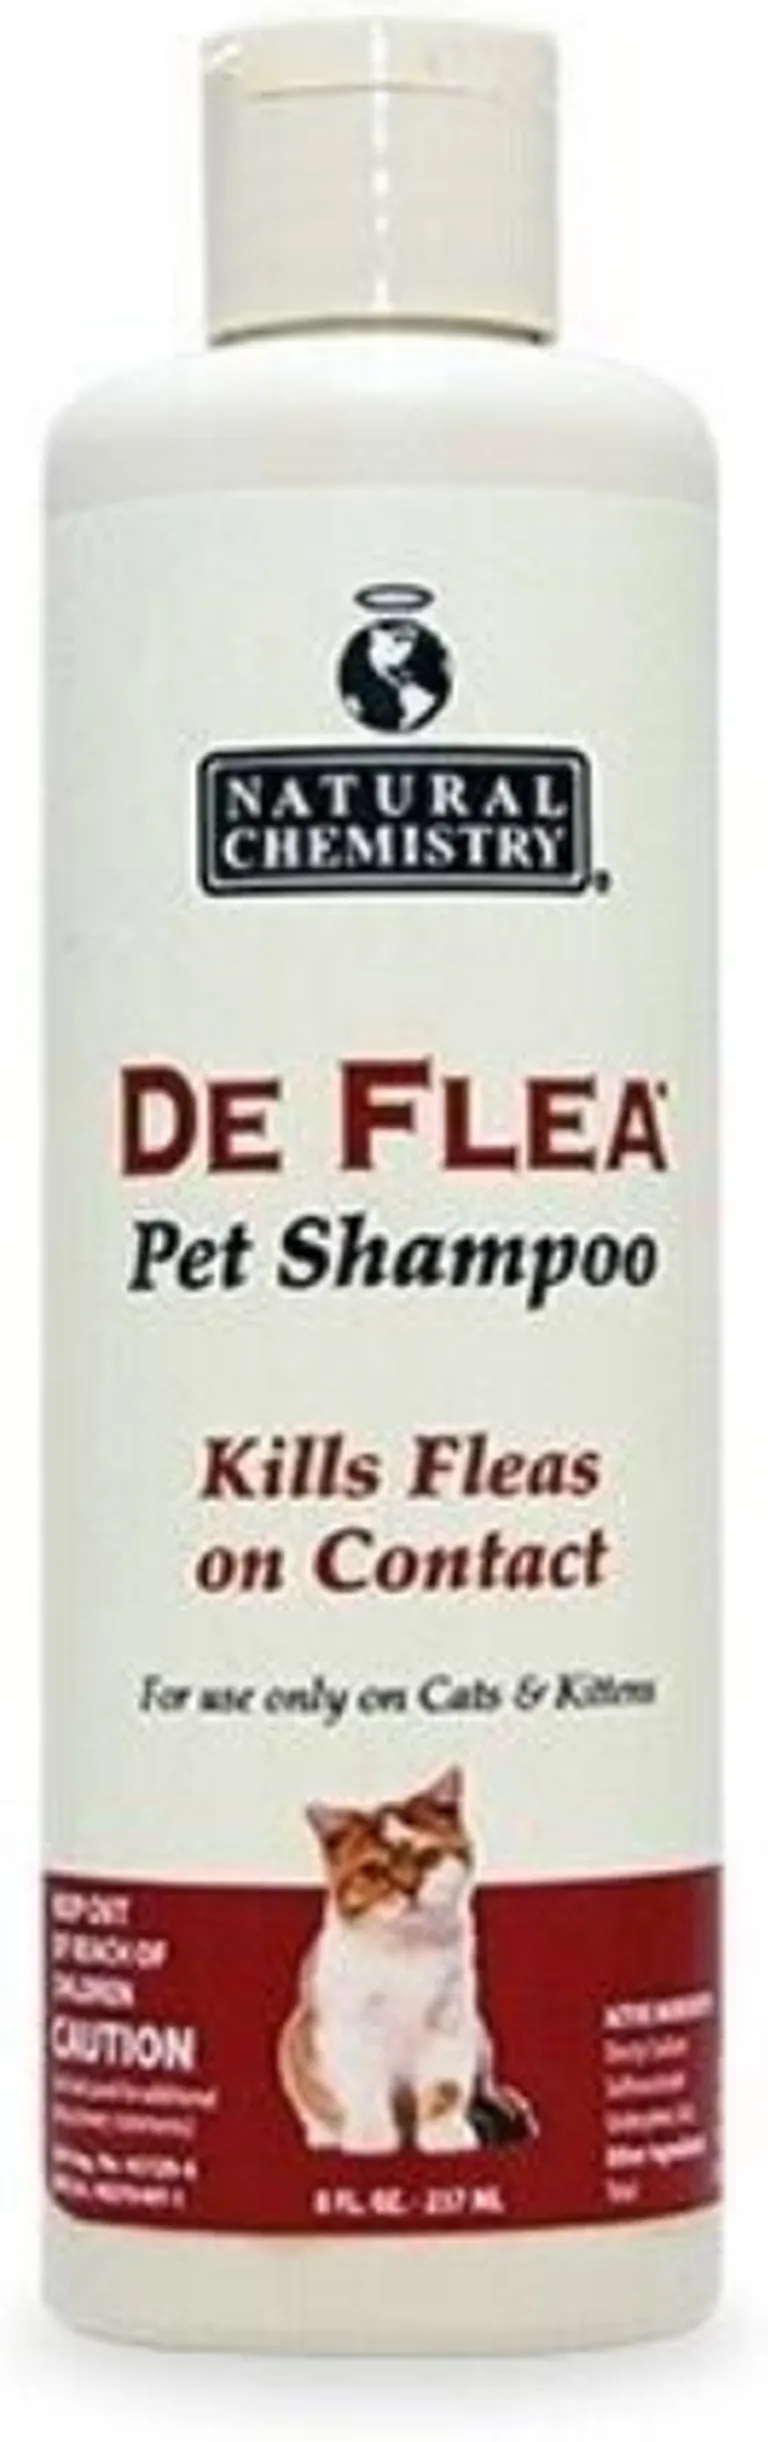 Miracle Care Natural Chemistry DeFlea Pet Shampoo for Cats Photo 2